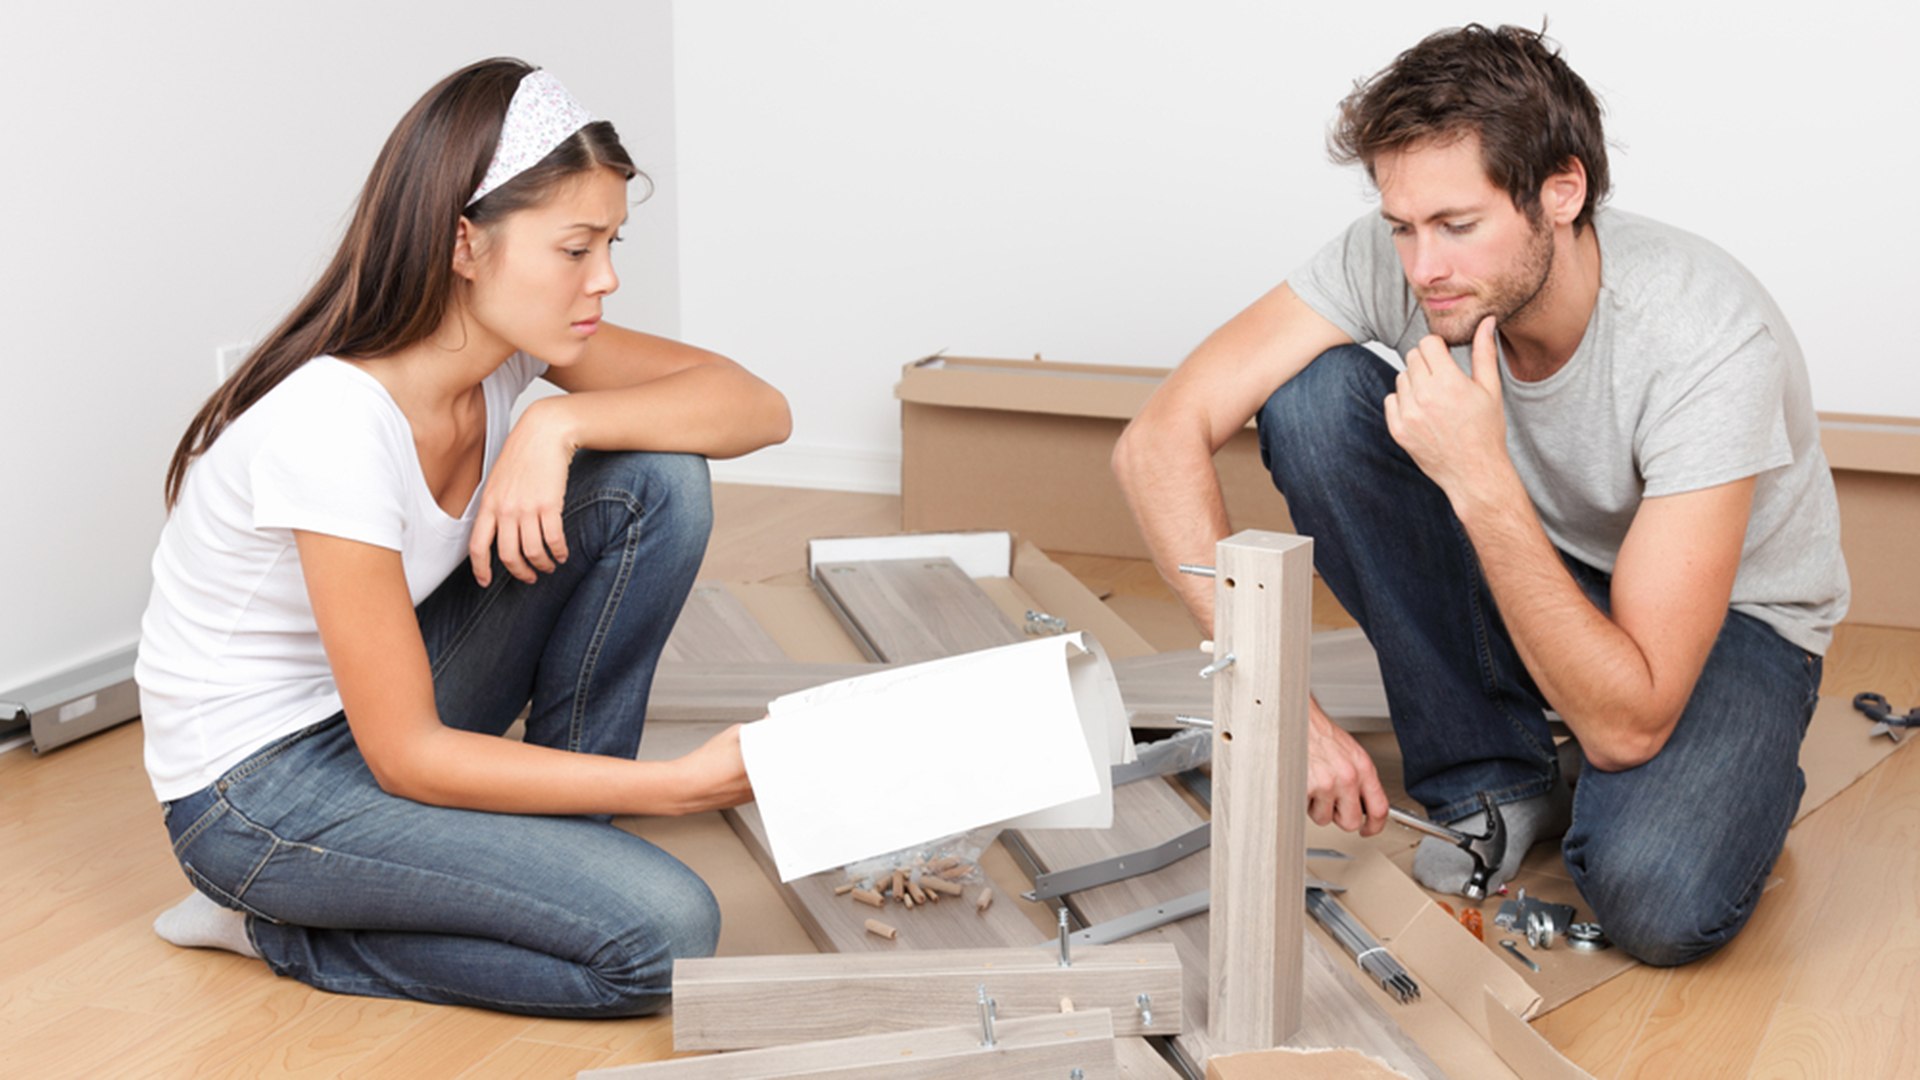 Sport or Not: Putting Together IKEA Furniture